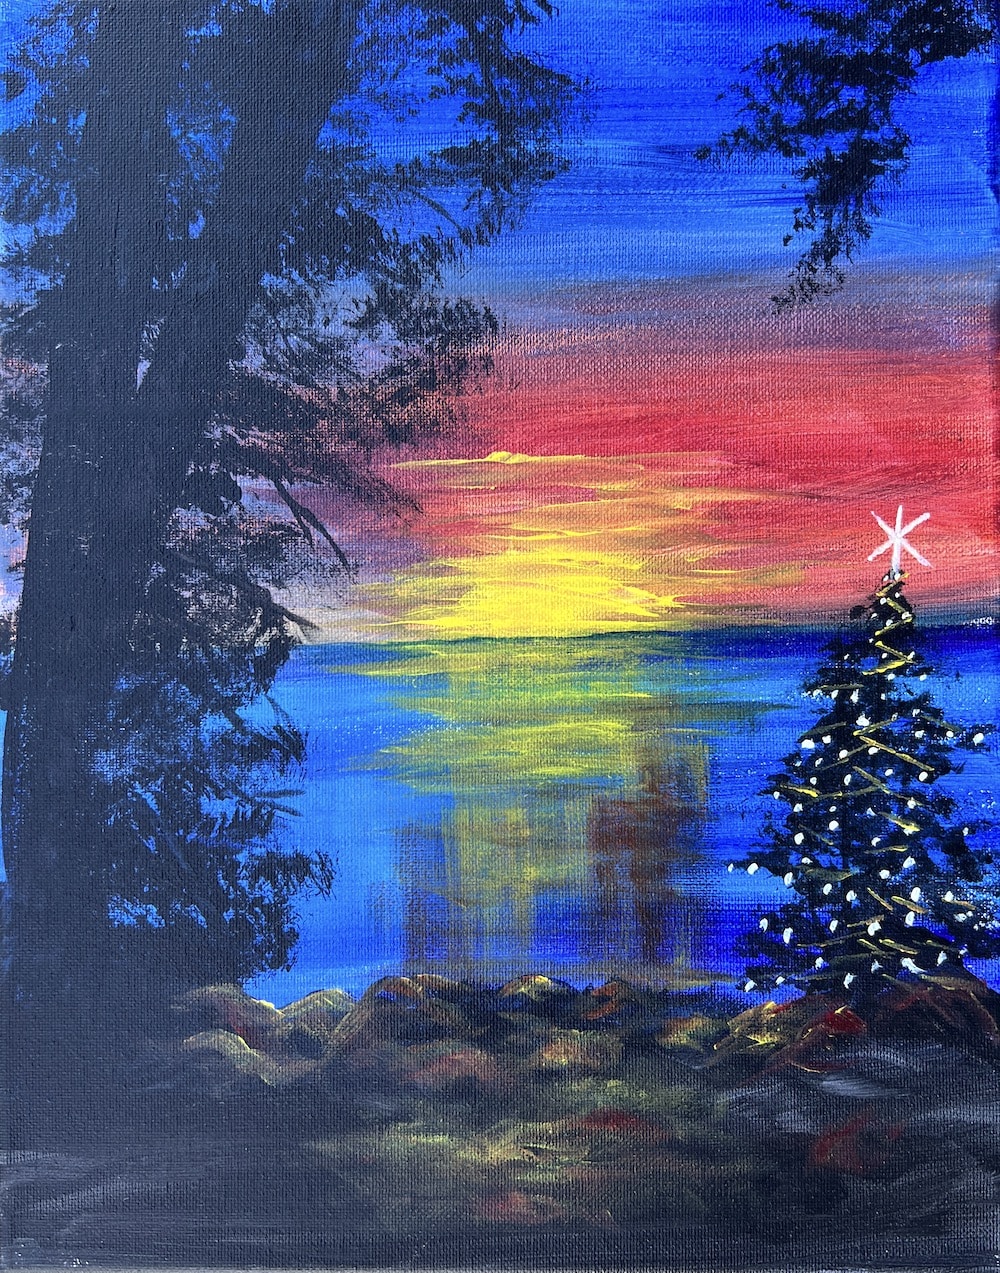 Festive Painting Cape Coral - Christmas at JC Park